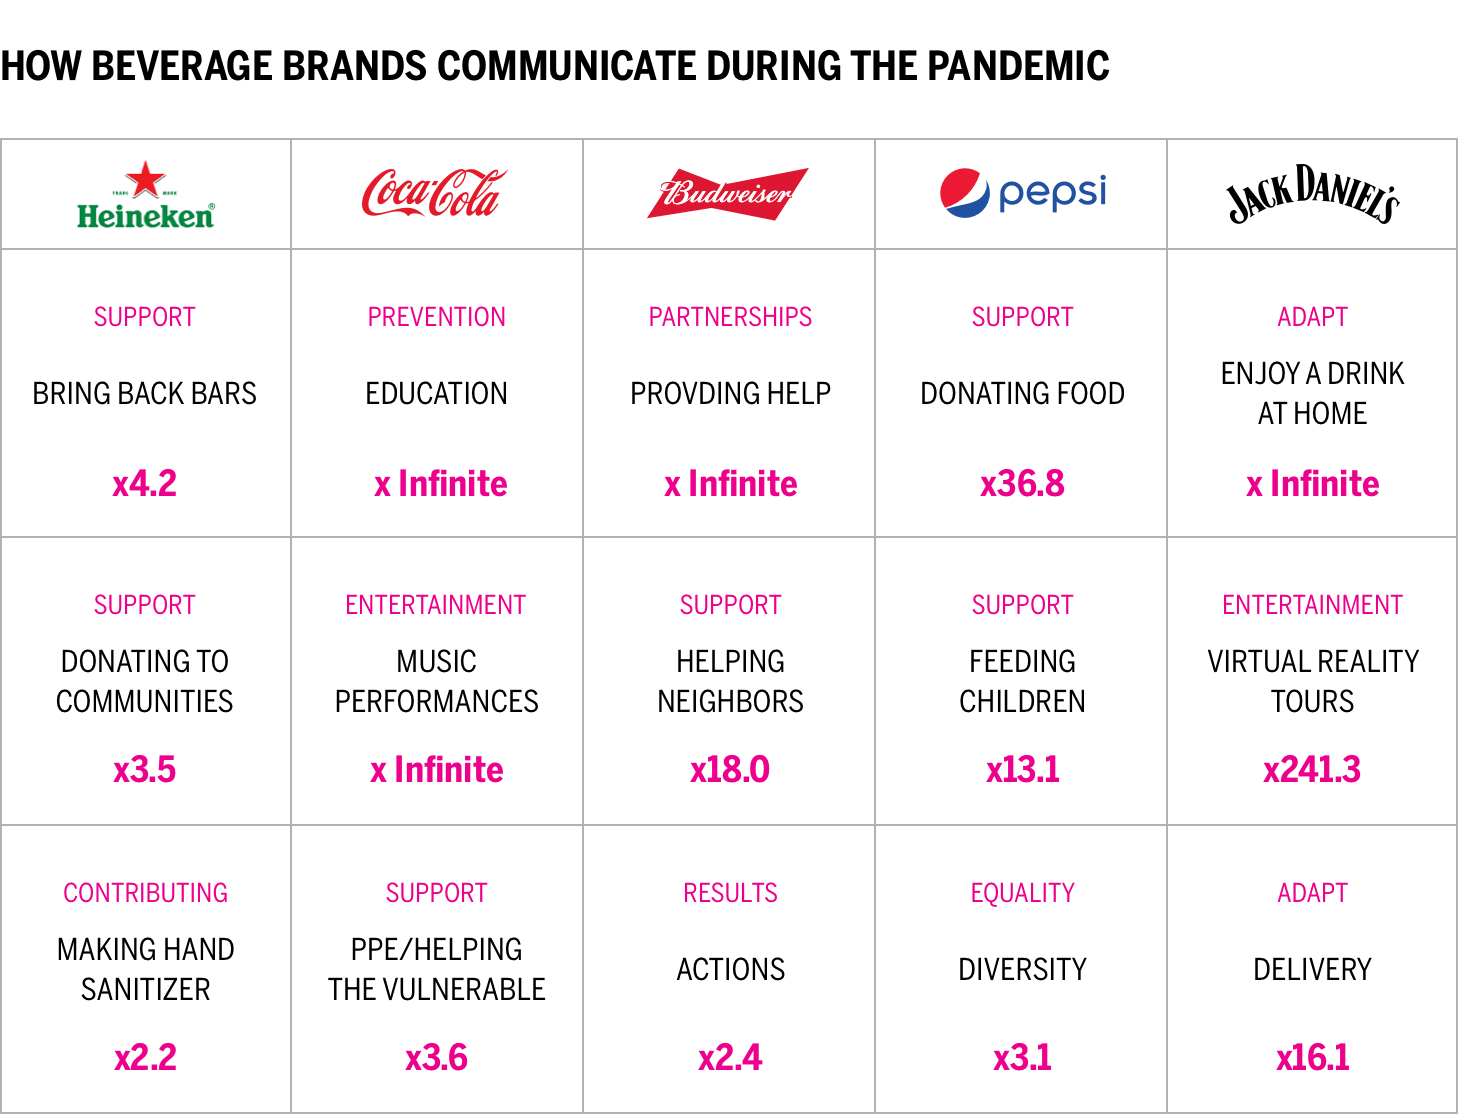 HOW BEVERAGE BRANDS COMMUNICATE DURING THE PANDEMIC Chart